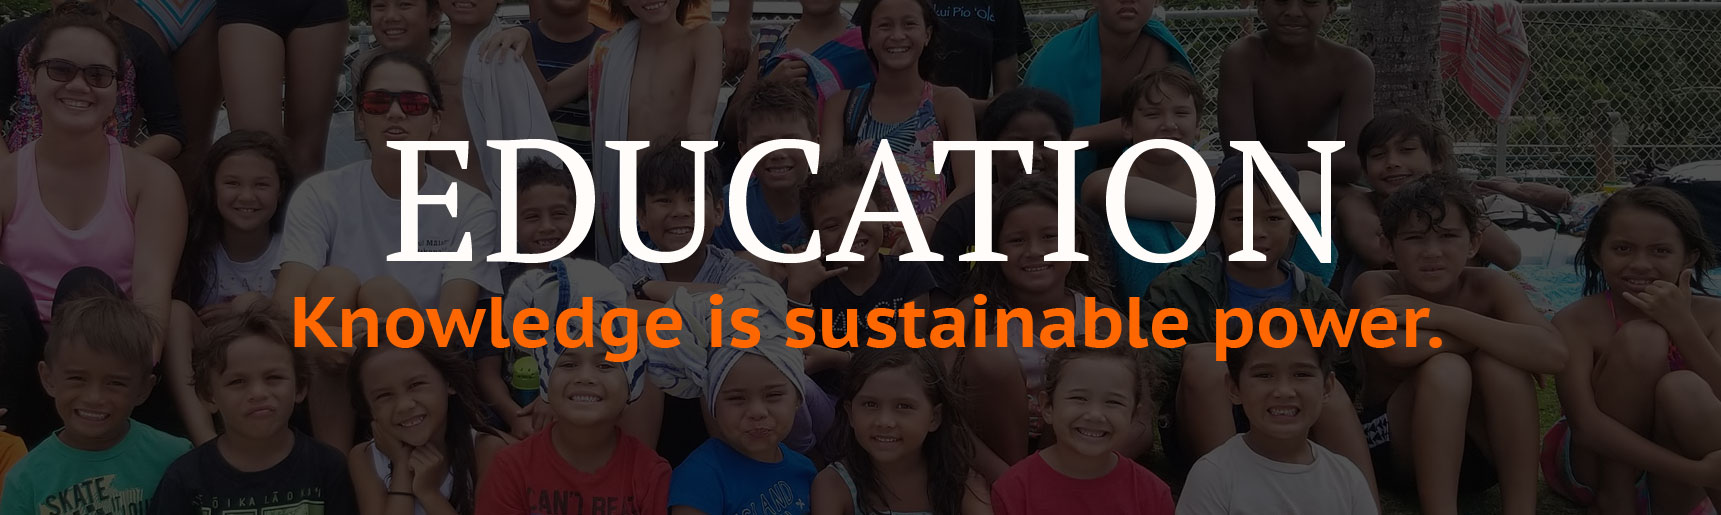 Education, knowledge is sustainable power